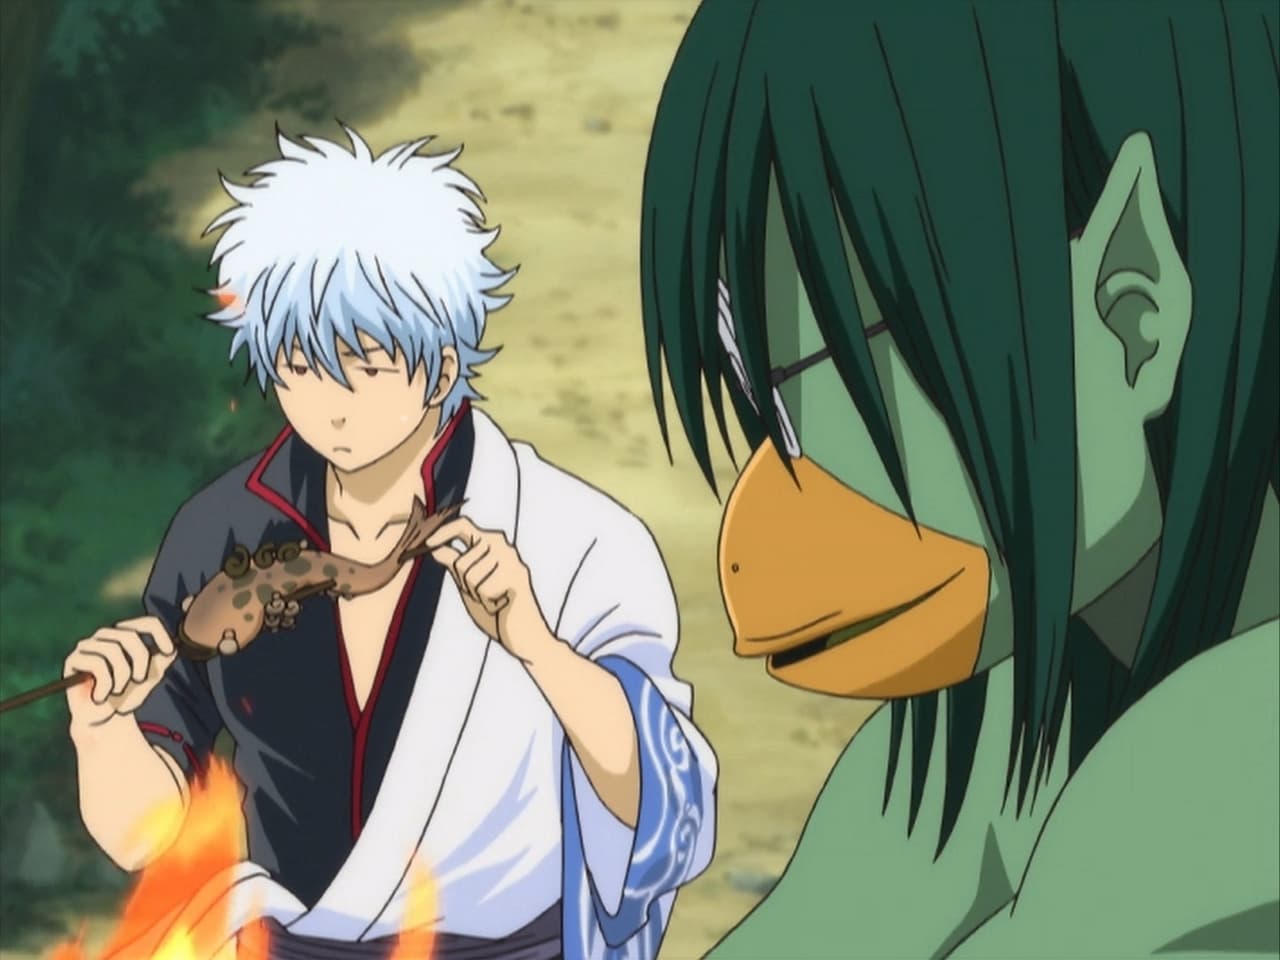 Gintama - Season 1 Episode 21 : If You're a Man, Try the Swordfish / If You Go to Sleep With the Fan On, You'll Get a Stomachache, So Be Careful